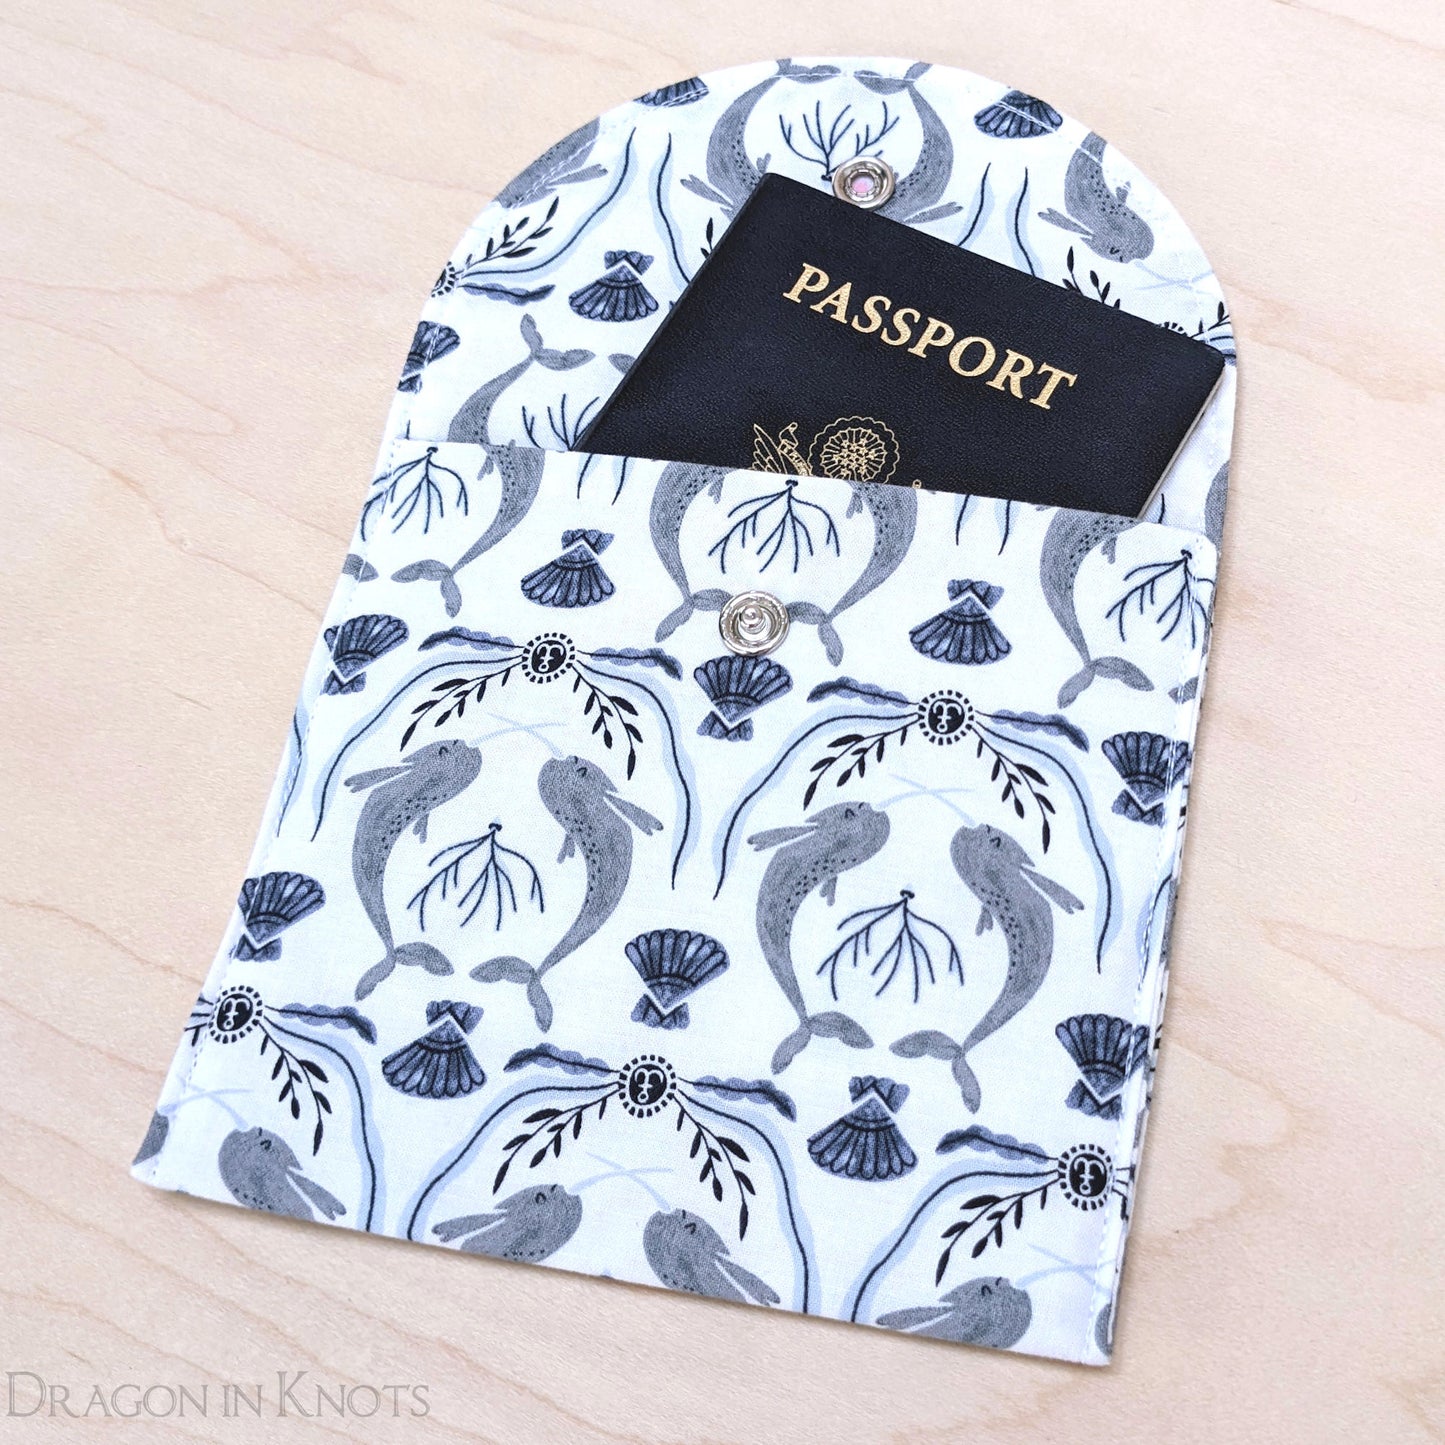 Narwhal Damask Accessory Pouch - Dragon in Knots handmade